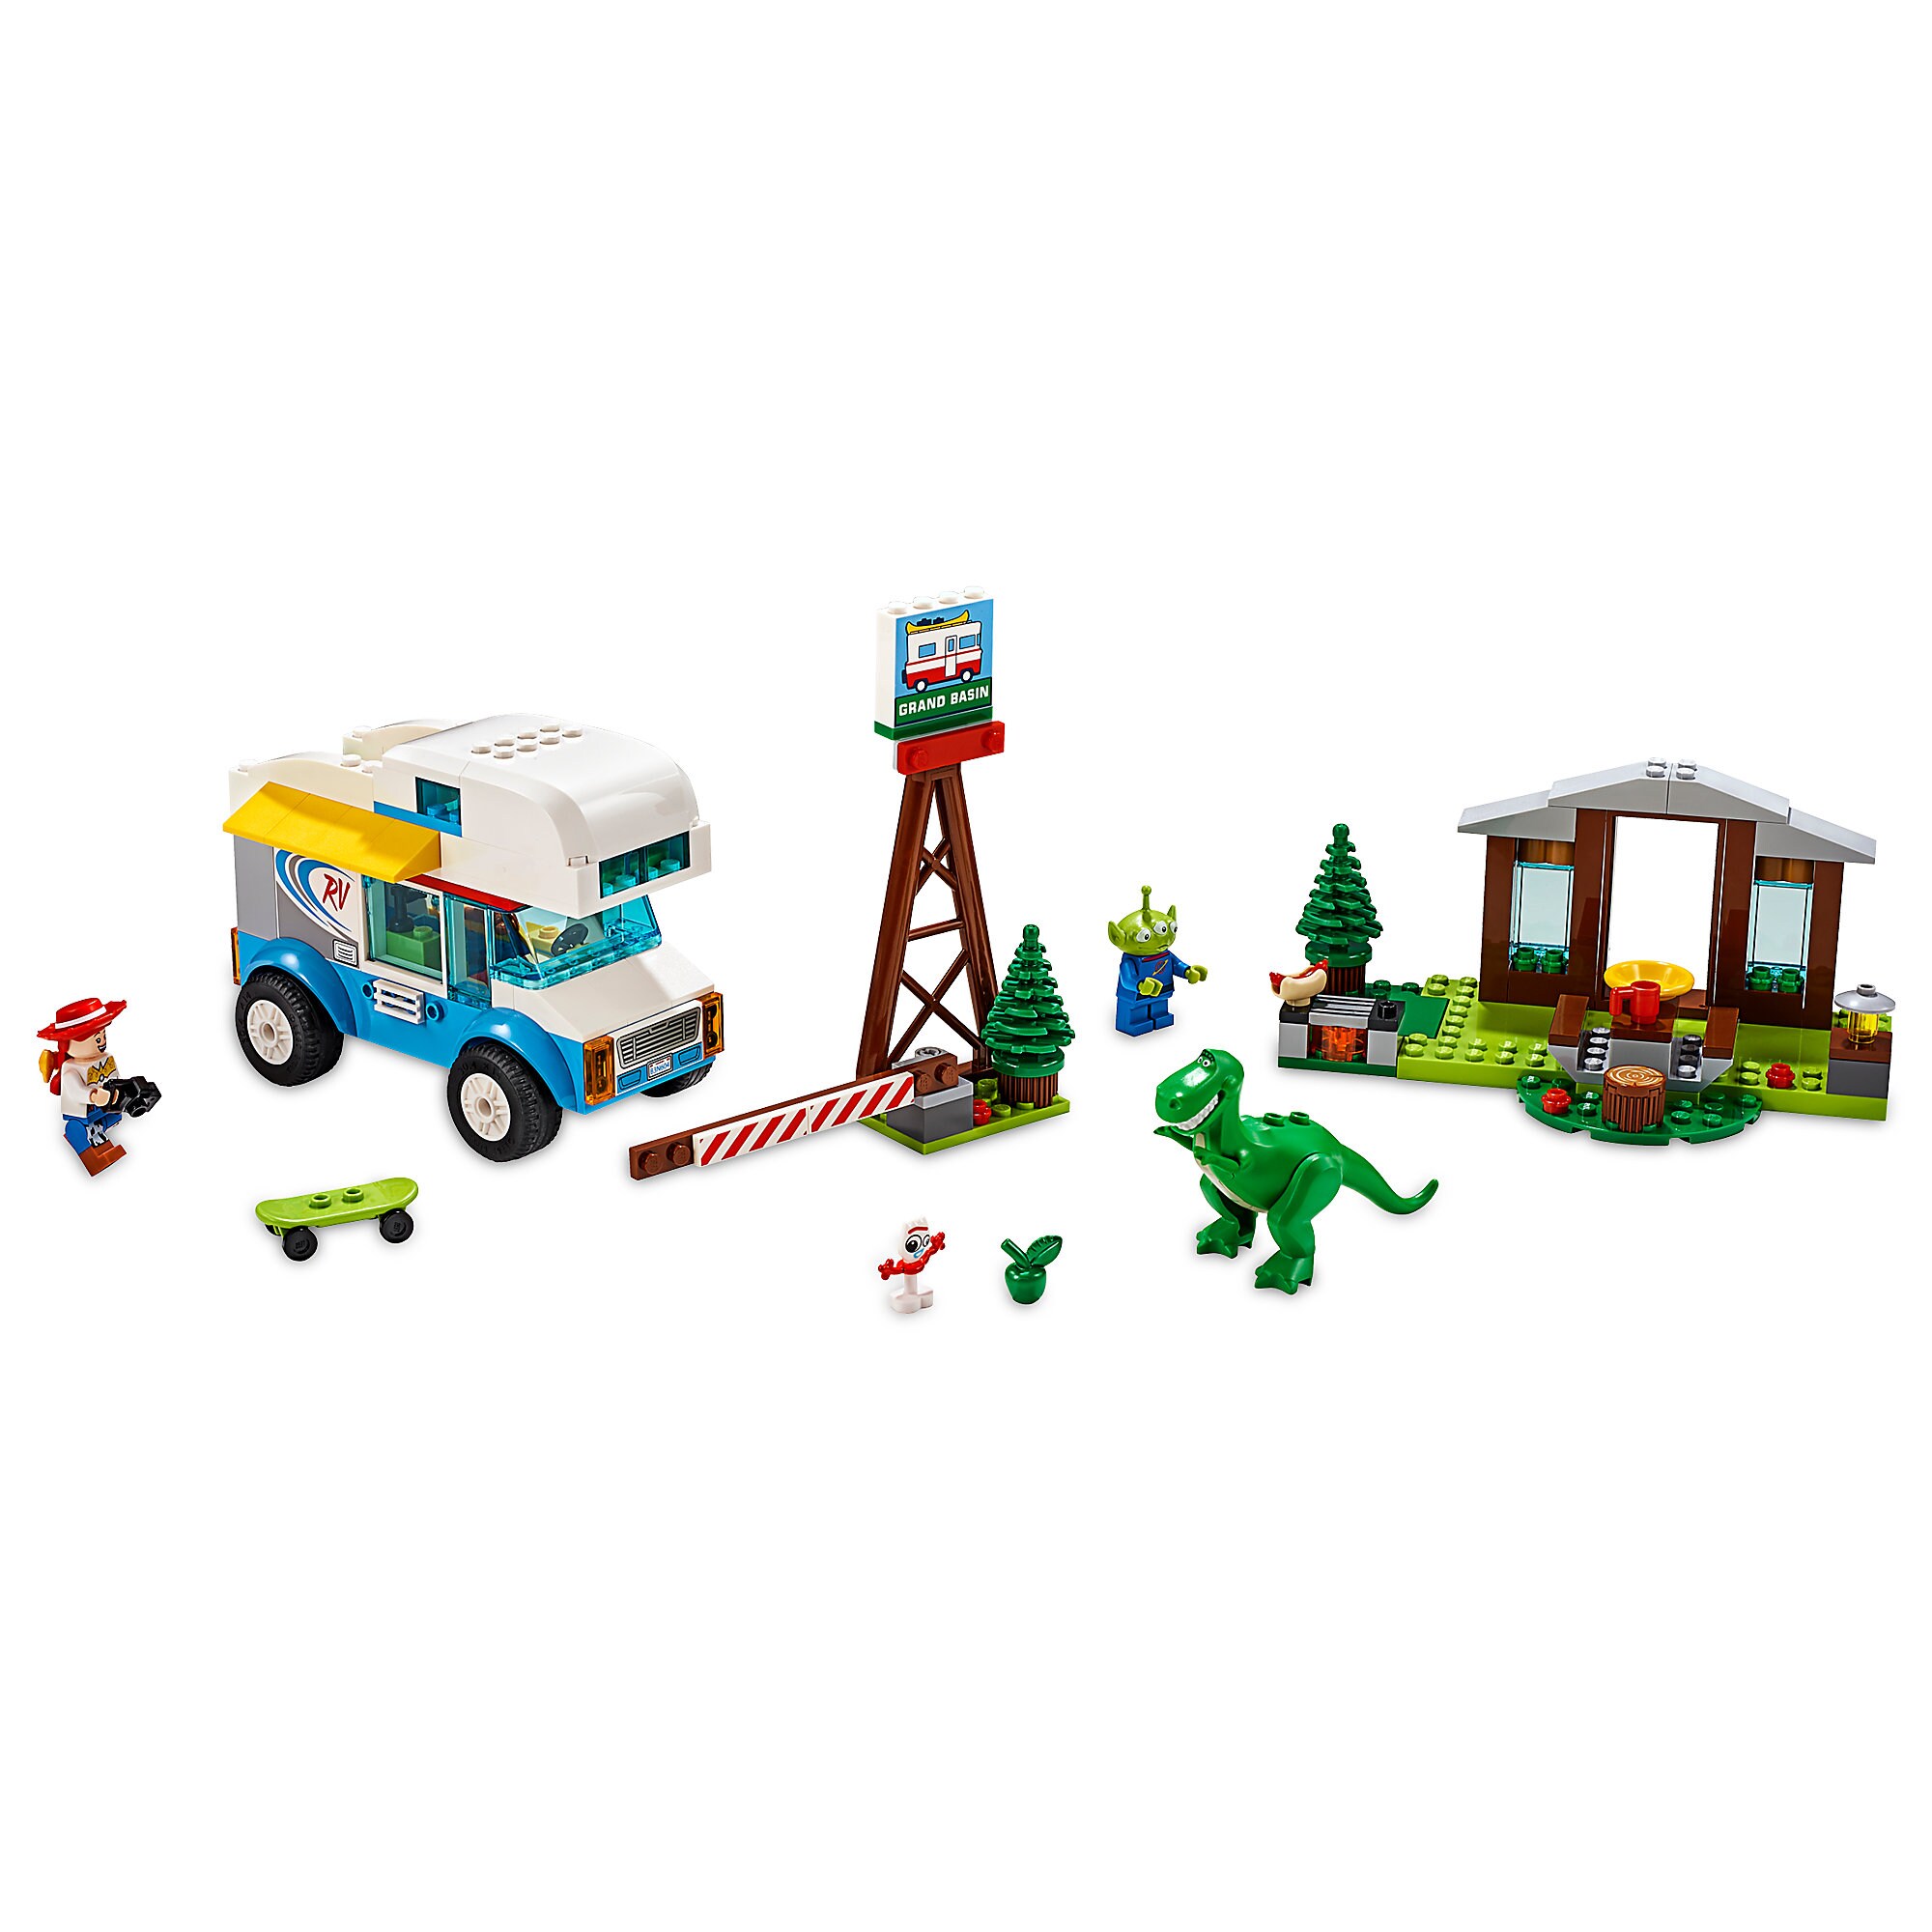 Toy Story 4 RV Vacation Play Set by LEGO